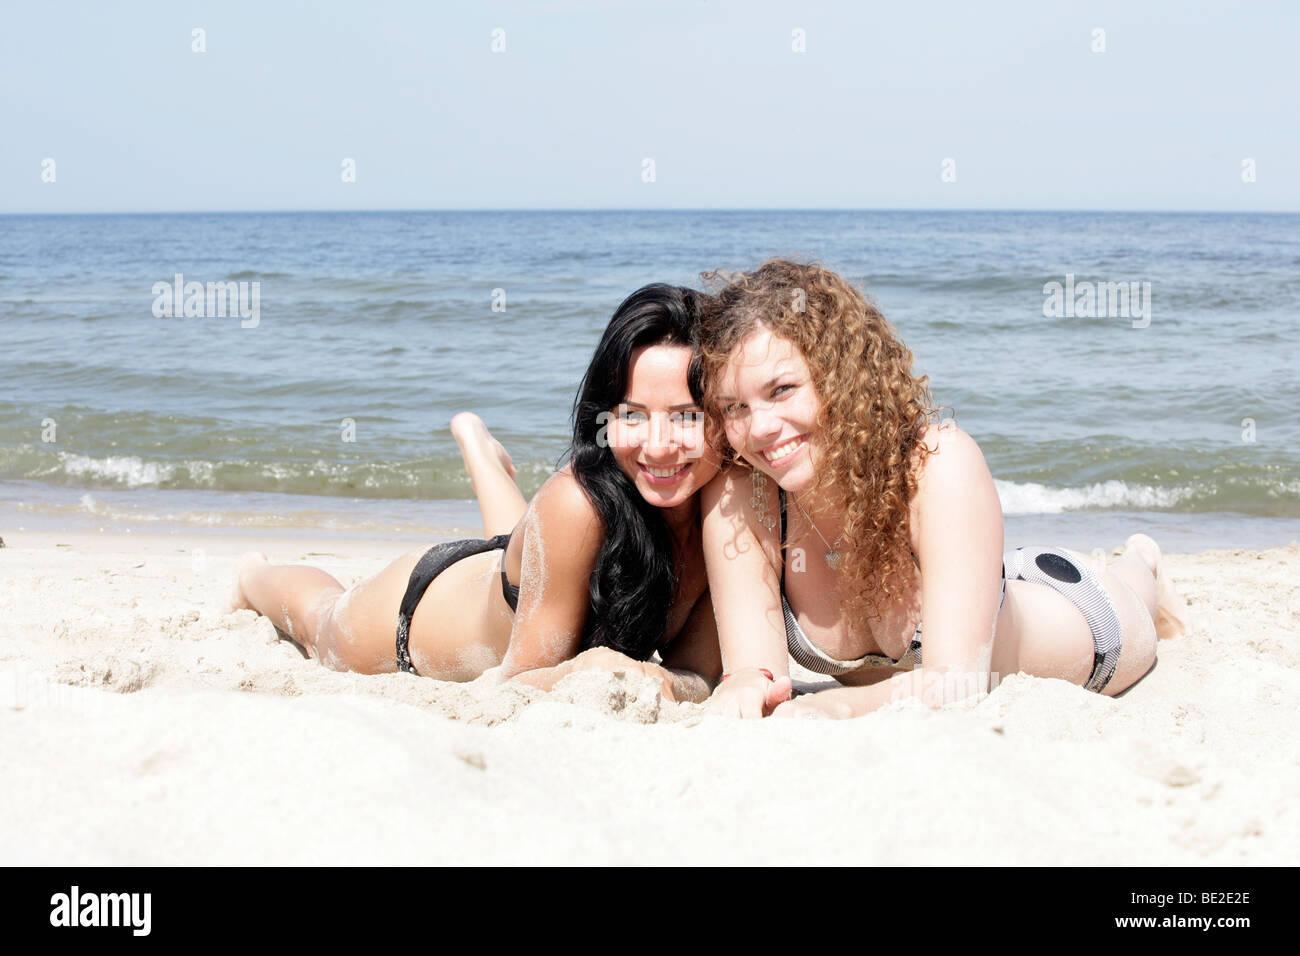 Two alluring women are relaxing on the nudist beach